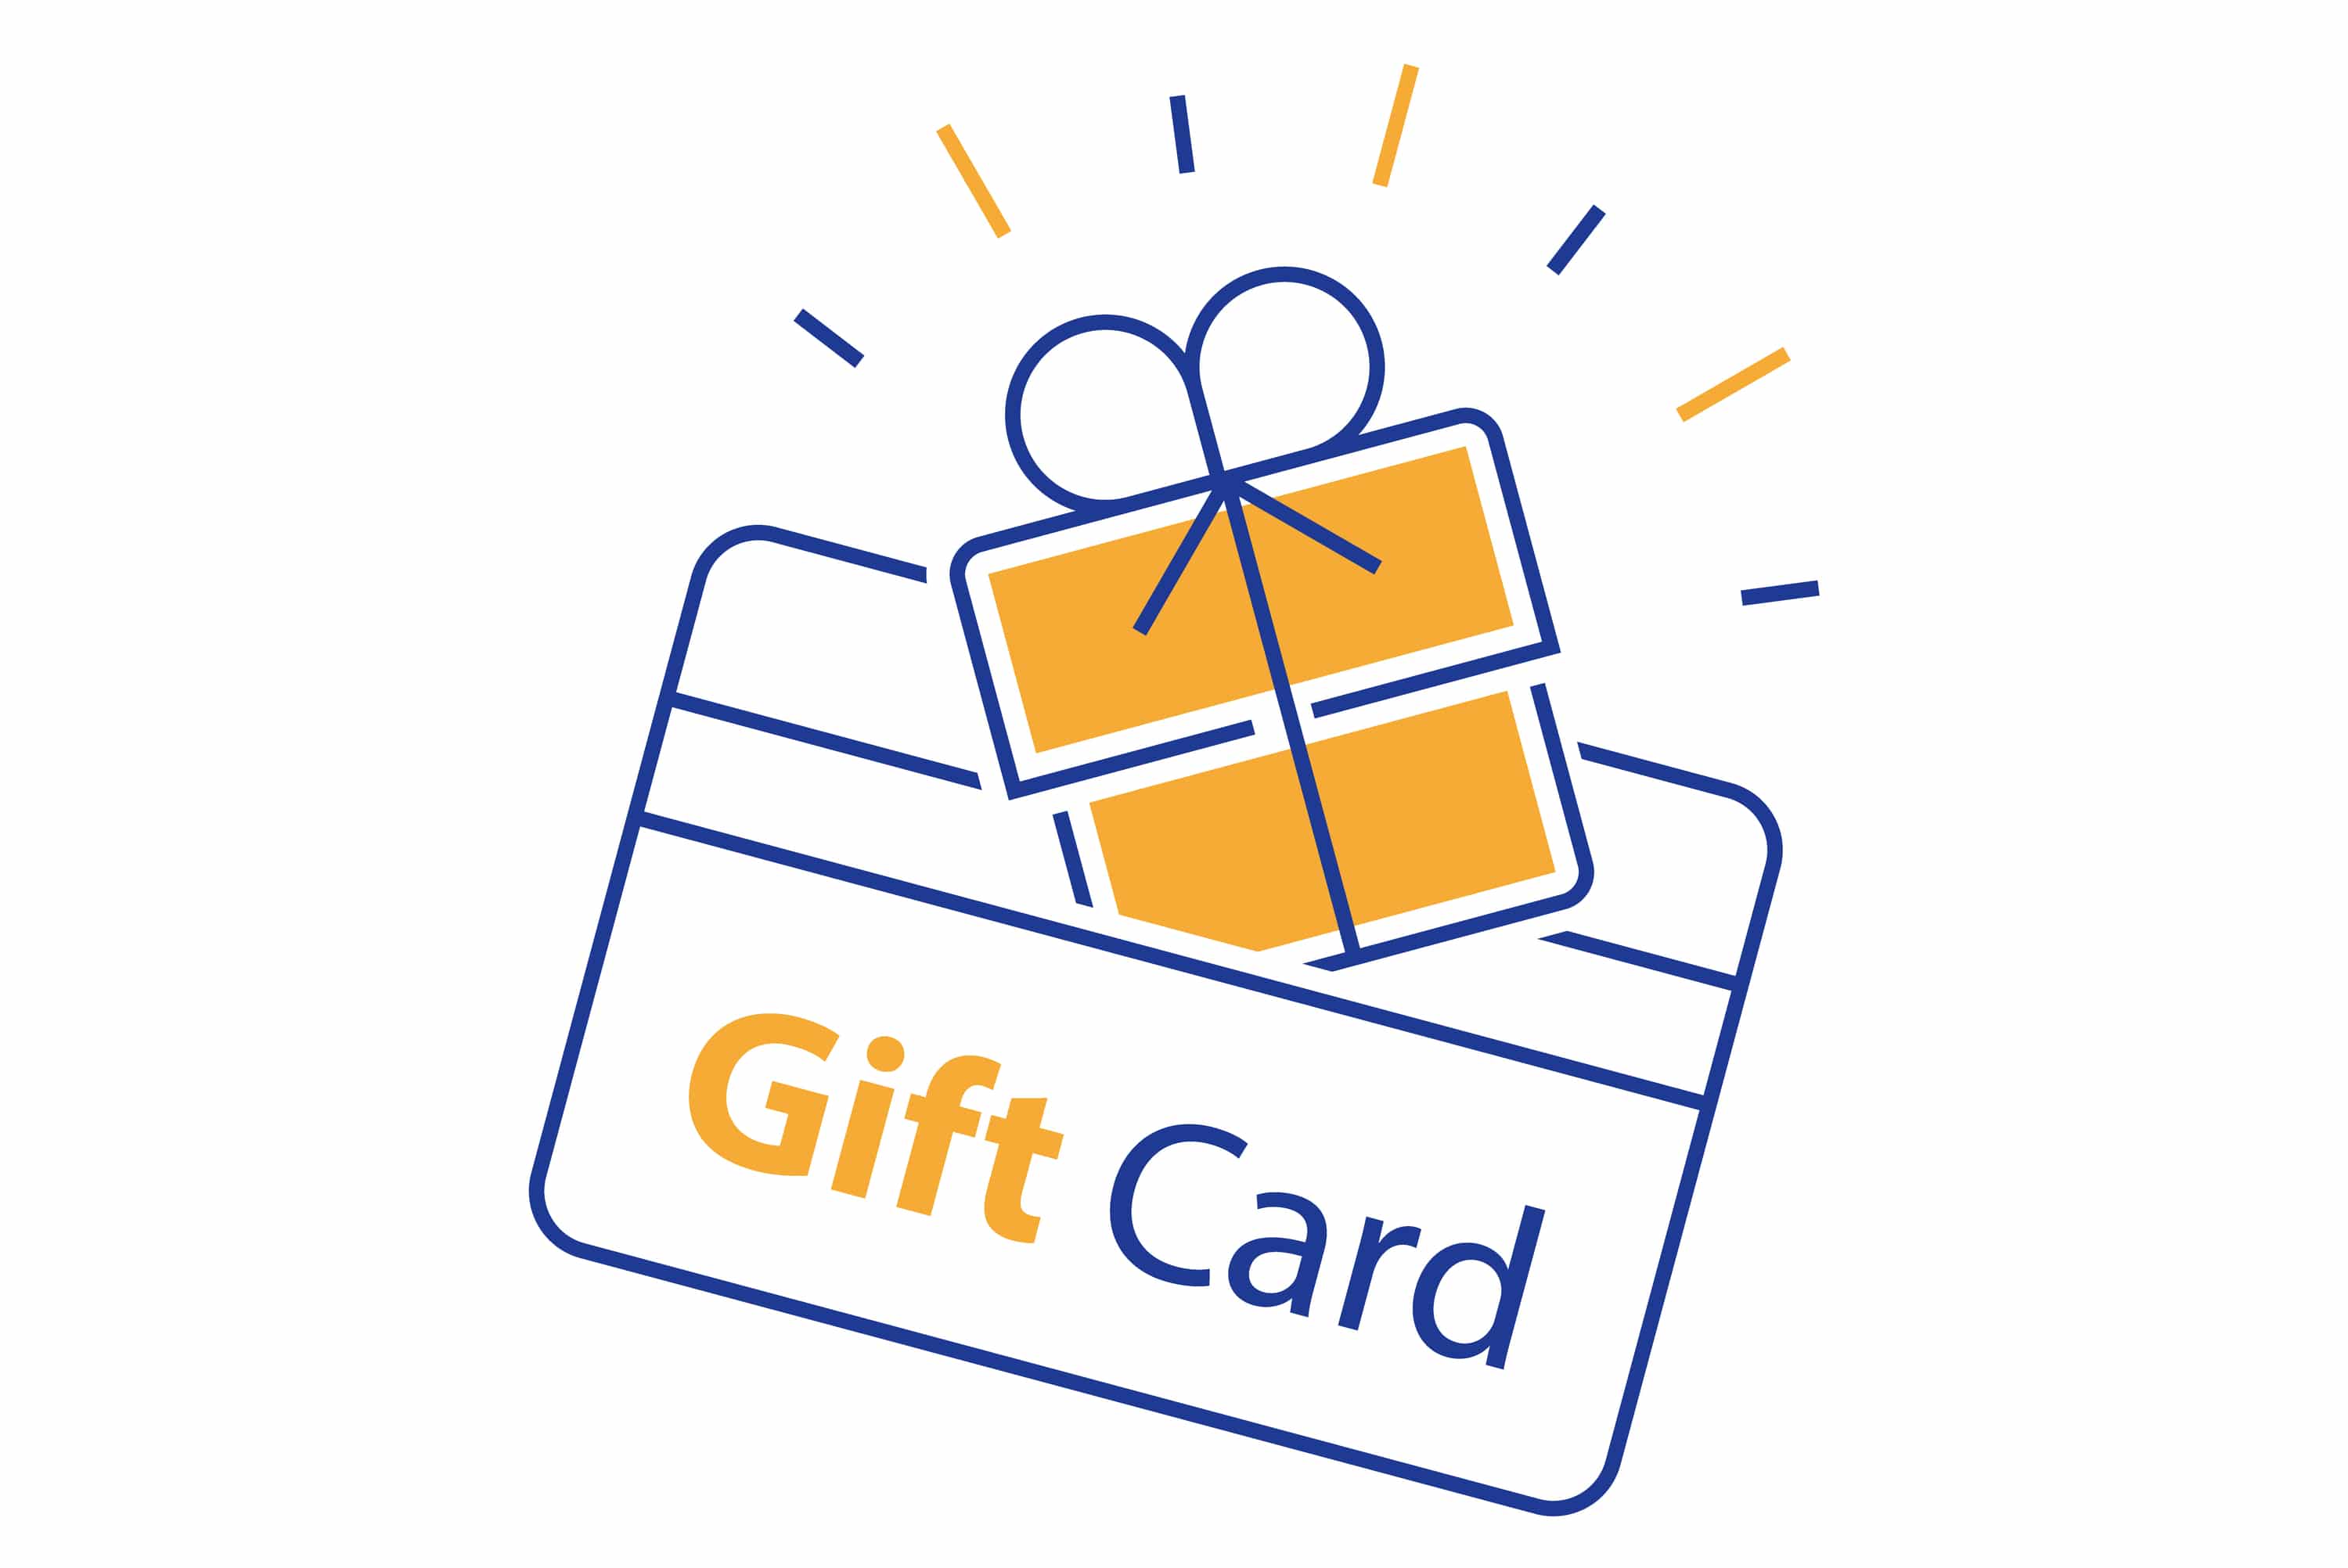 Gift Cards and Vouchers - Earn Cashback on Gifts